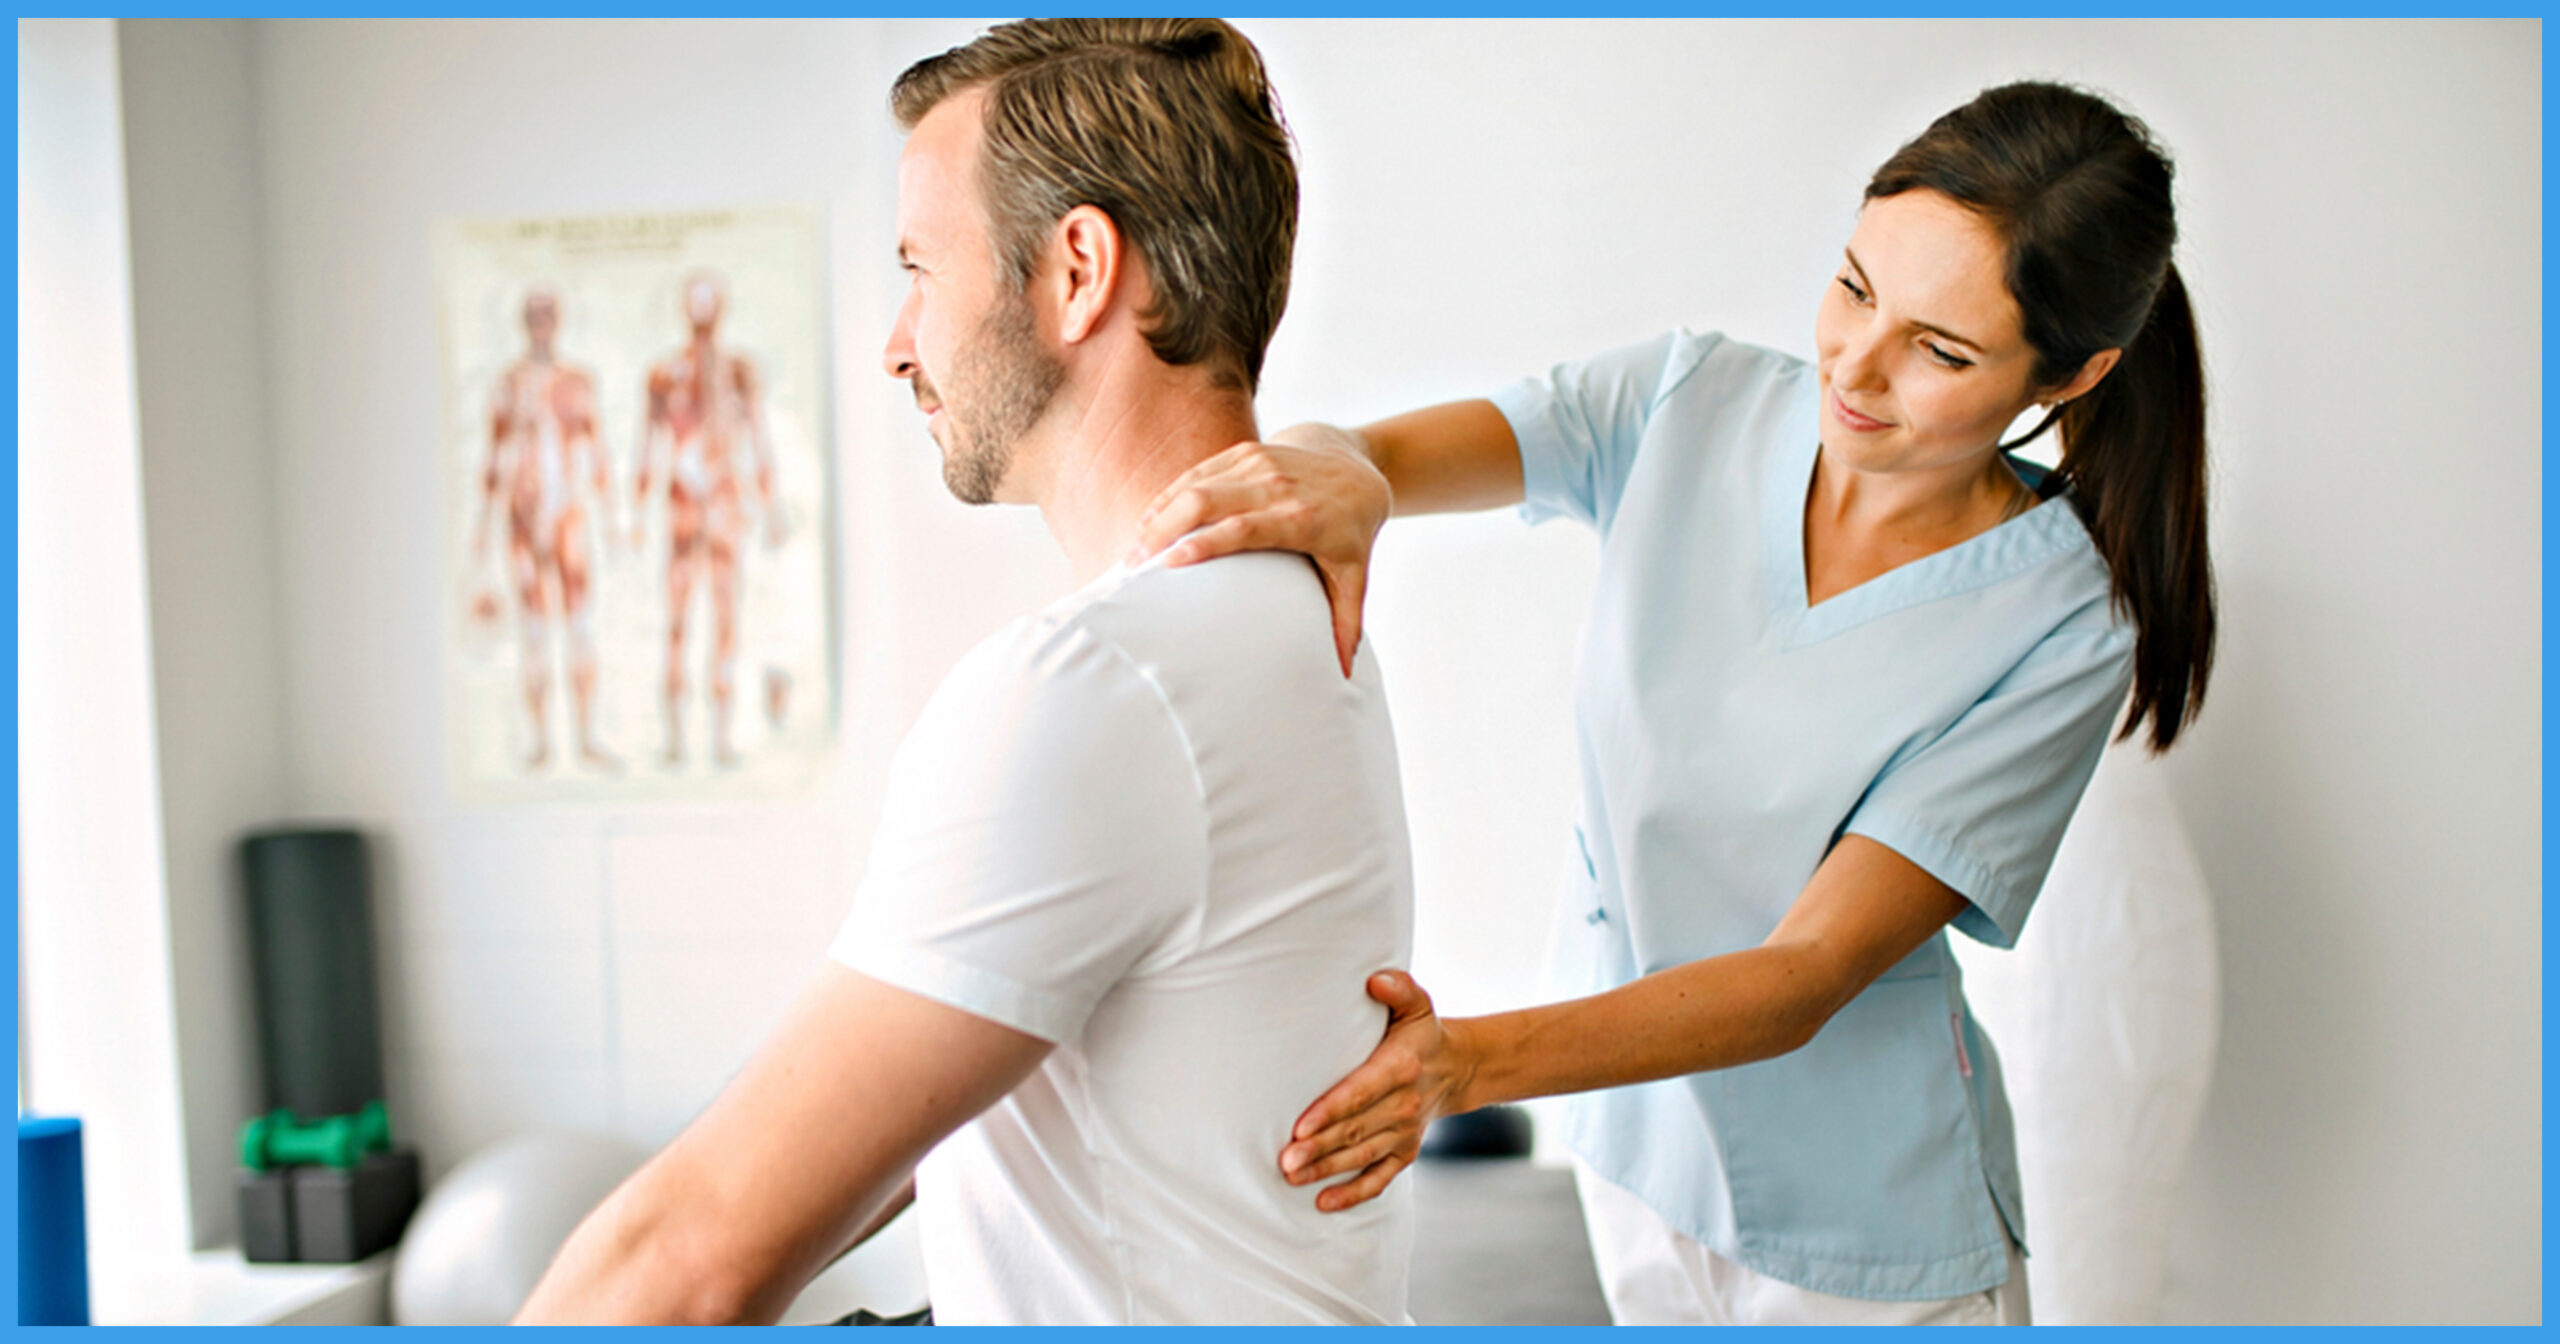 Walk-in Chiropractor Costs: All You Need to Know!